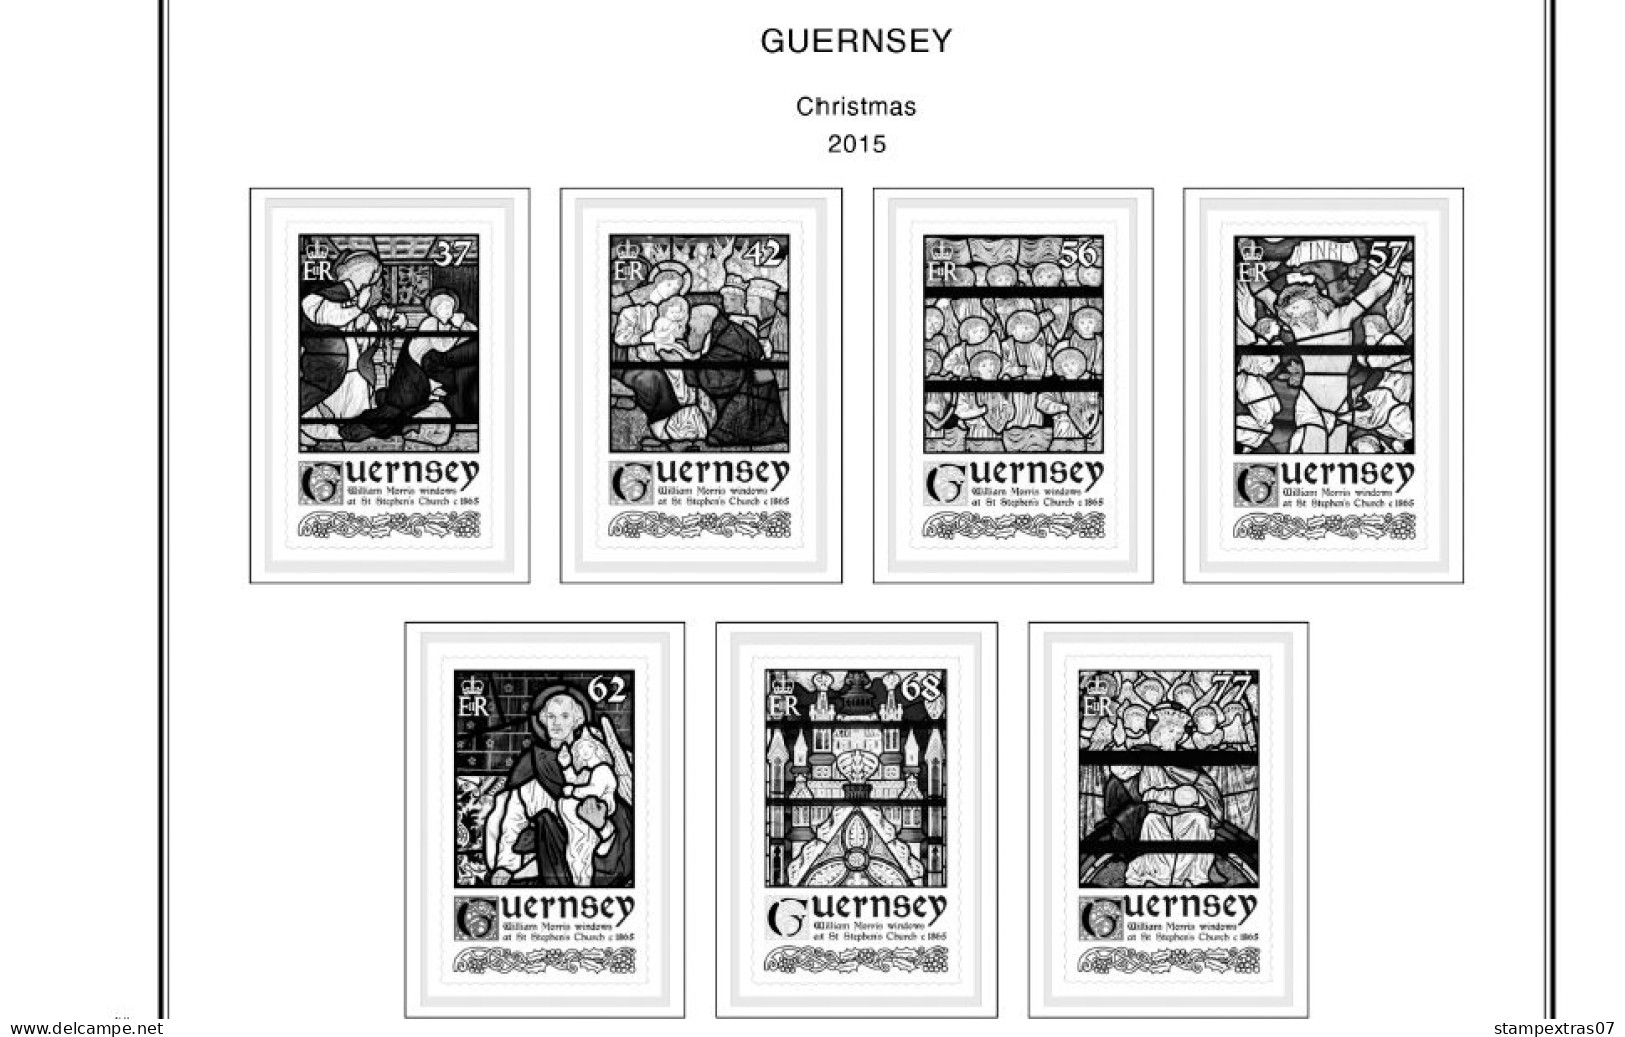 GB GUERNSEY 1958-2010 + 2011- 2020 STAMP ALBUM PAGES (212 b&w illustrated pages)